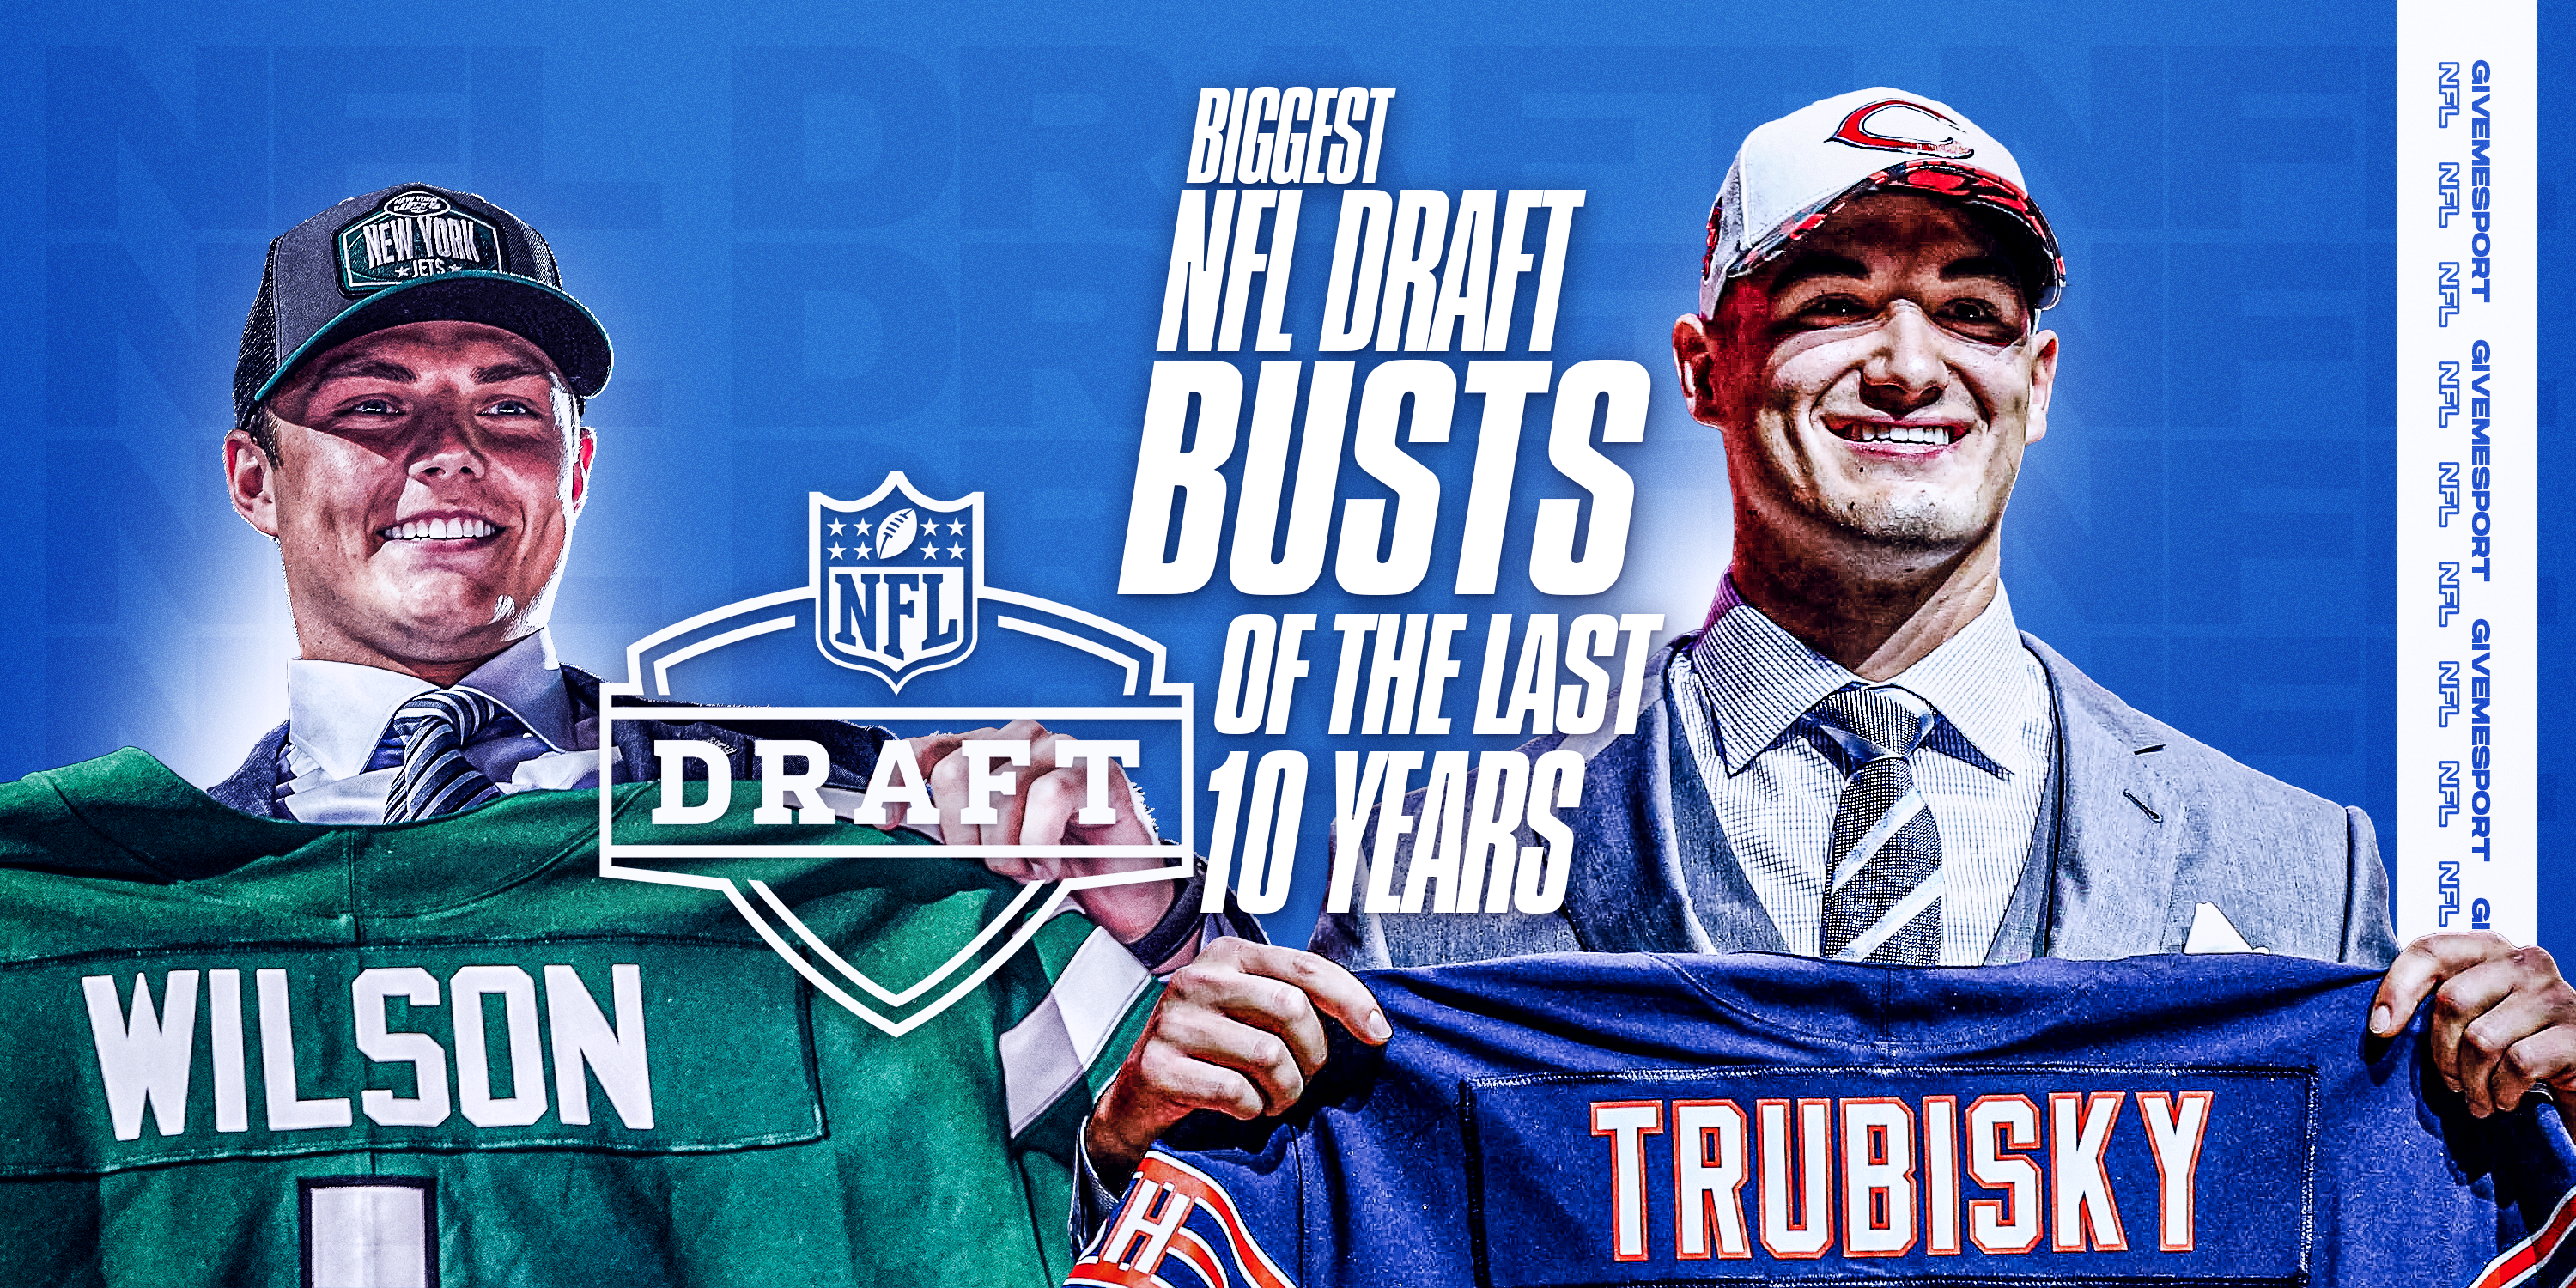 10 Biggest NFL Draft Busts of the Last 10 Years